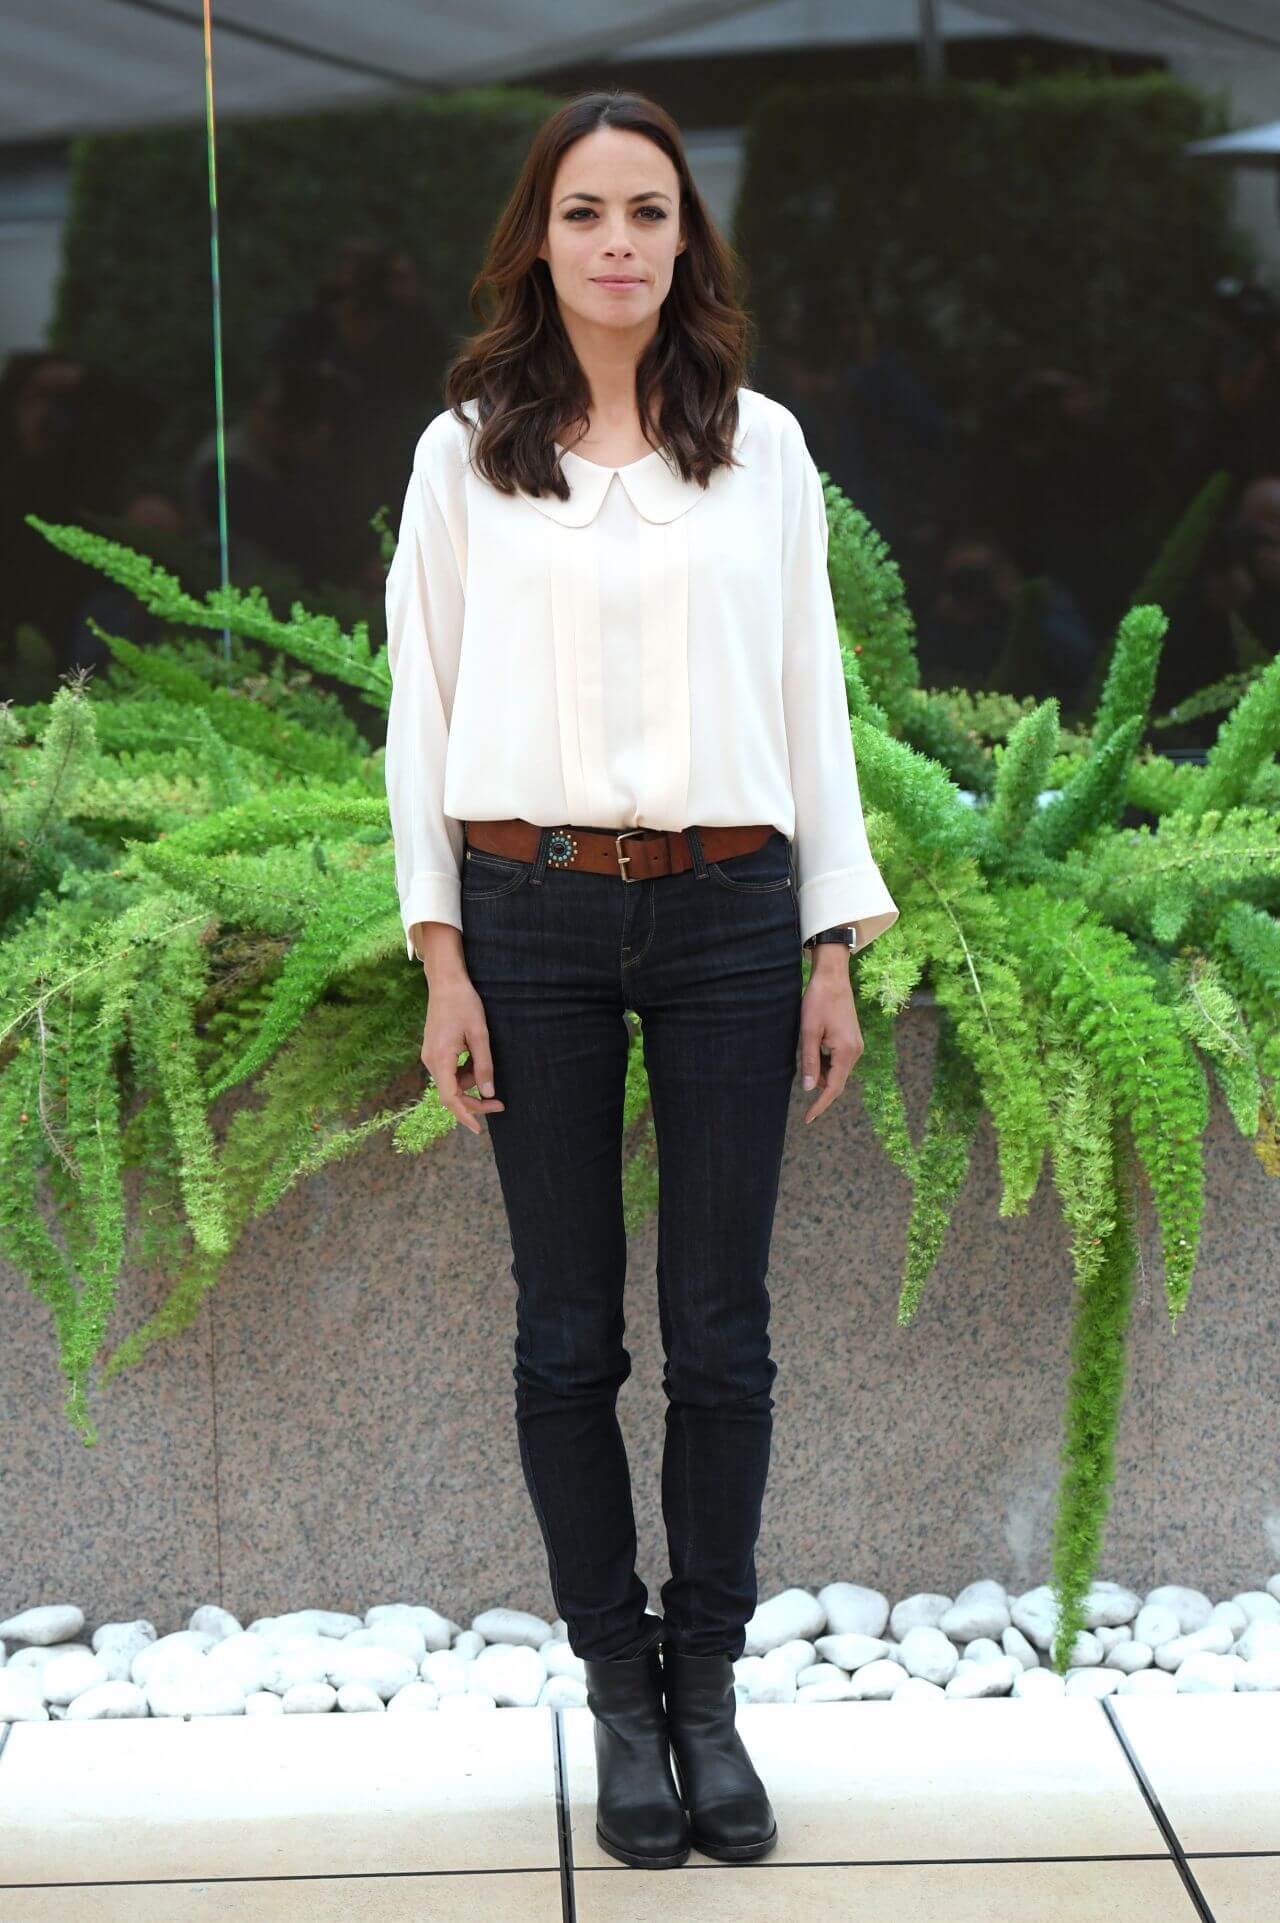 Berenice Bejo  In White Full Sleeves Top With Black Jeans At ‘Sweet Dreams’ Film Photocall in Rome